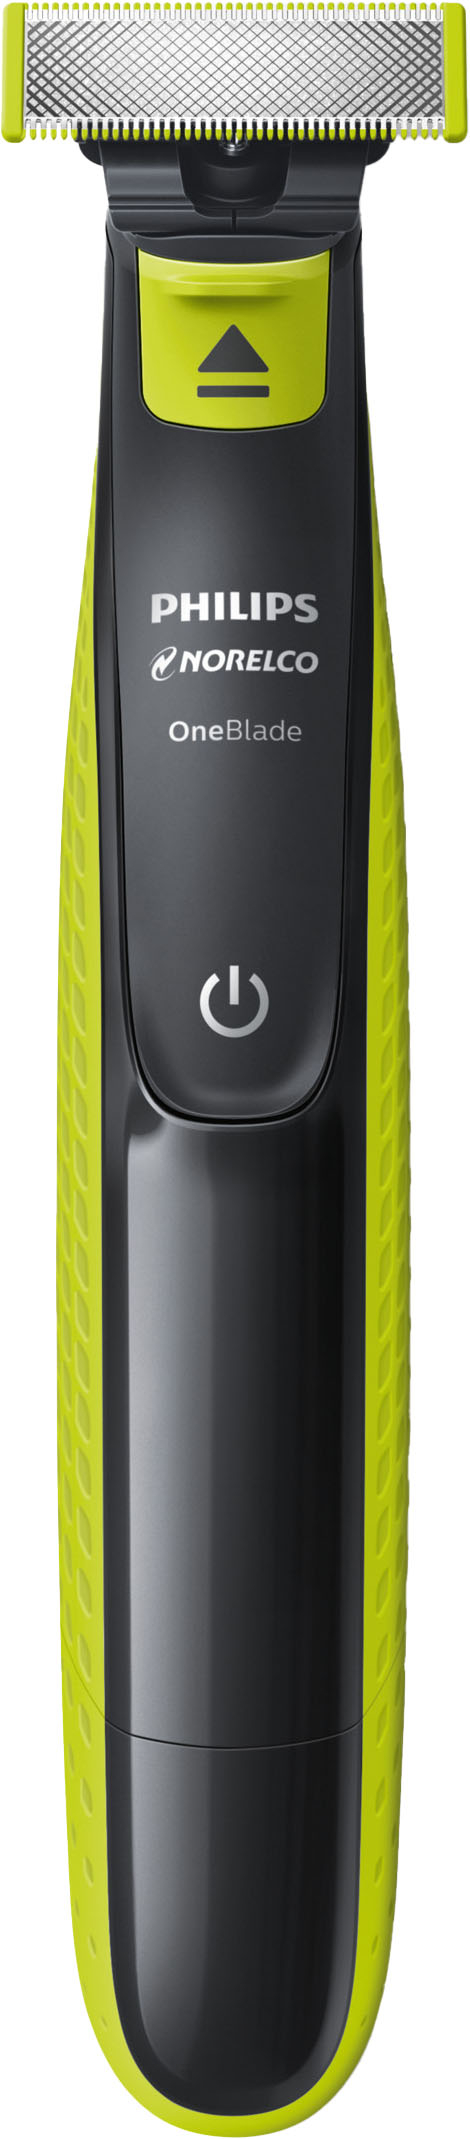 Left View: Philips Norelco OneBlade hybrid electric trimmer and shaver, QP2520/70 - Black And Lime Green